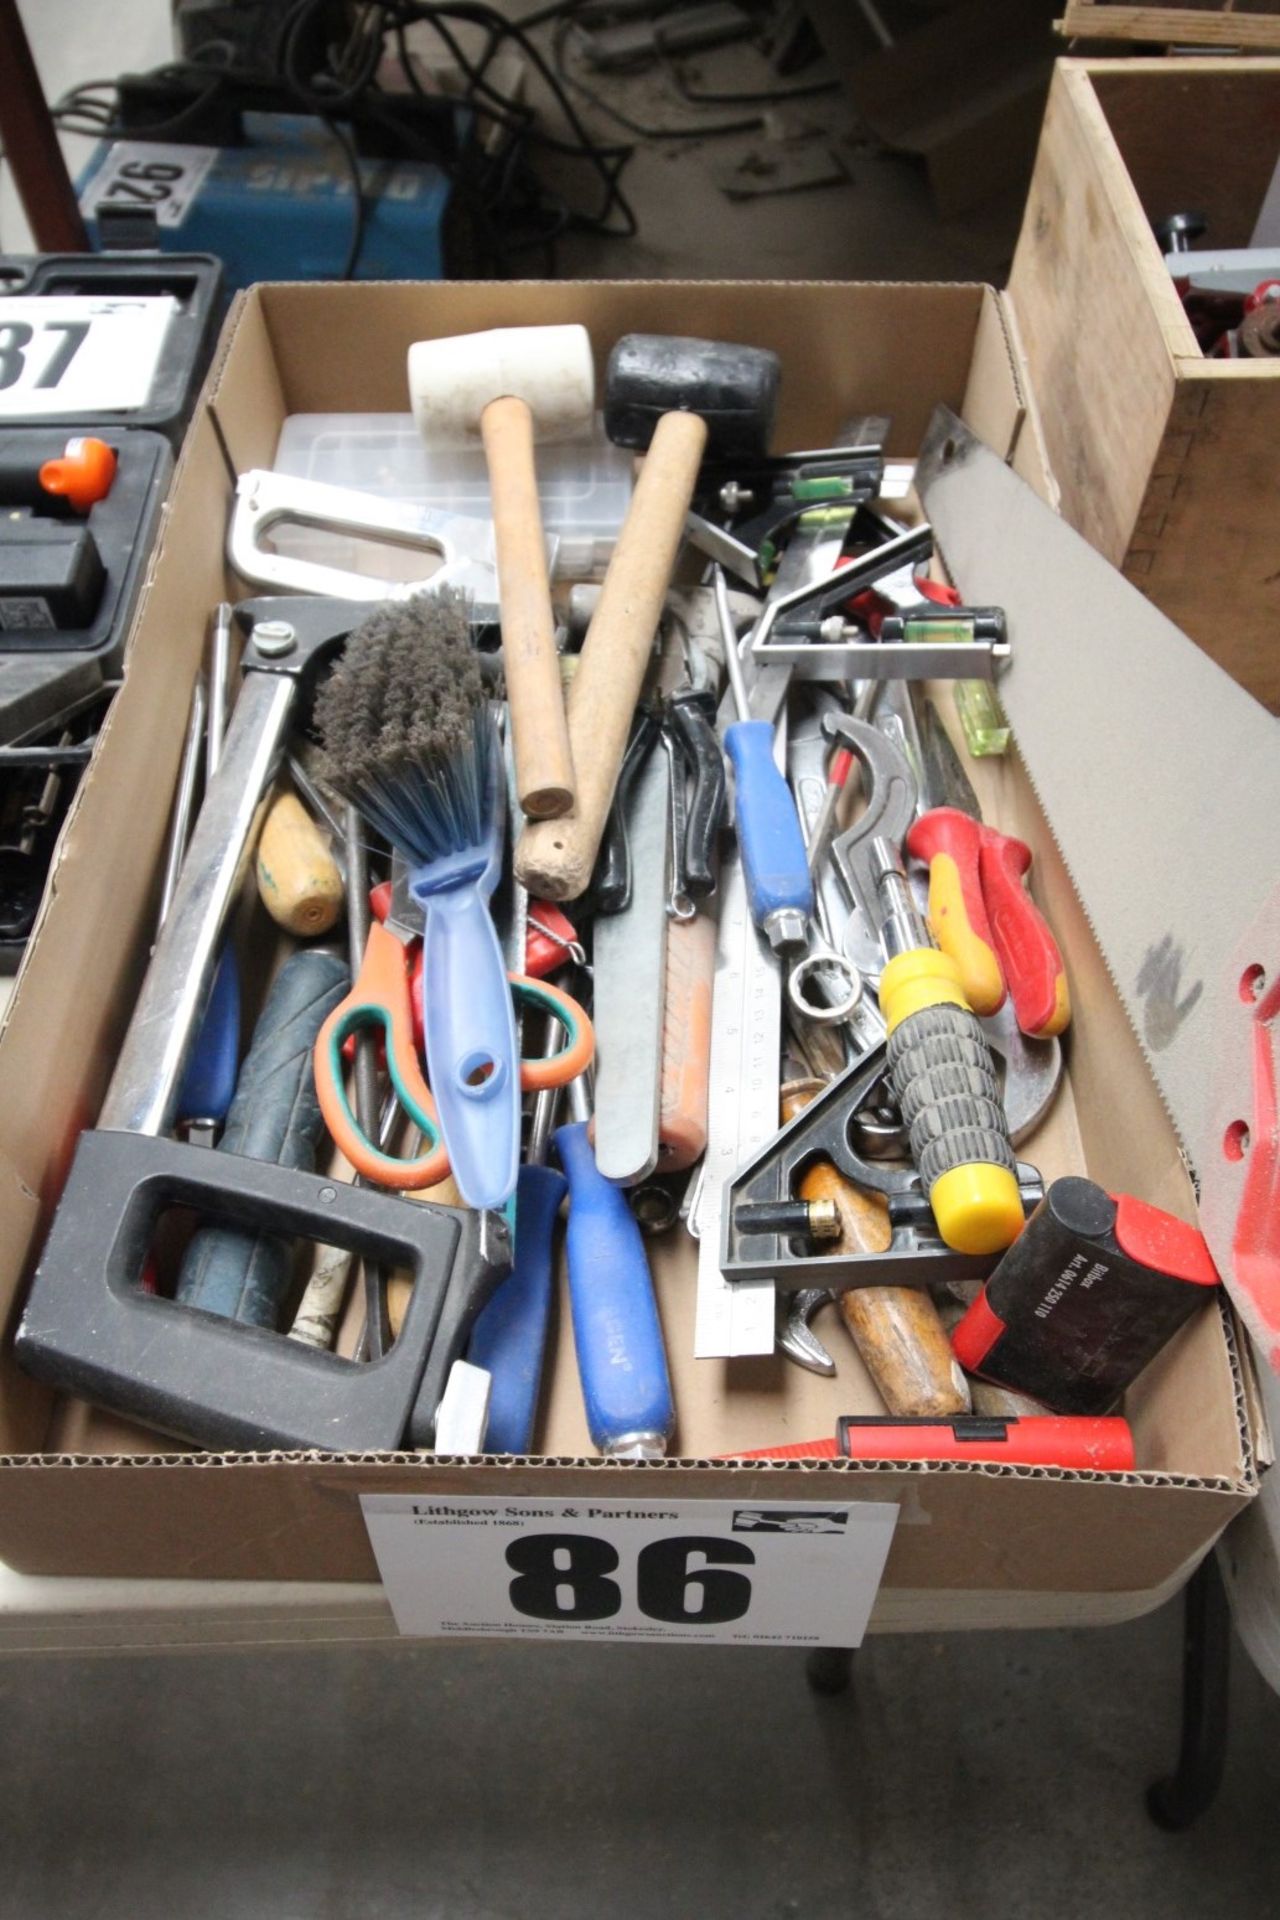 BOX & CONTENTS OF VARIOUS HAND TOOLS, METAL STRAIGHT EDGE RULERS, HACKSAWS, CLAW HAMMERS, RUBBER